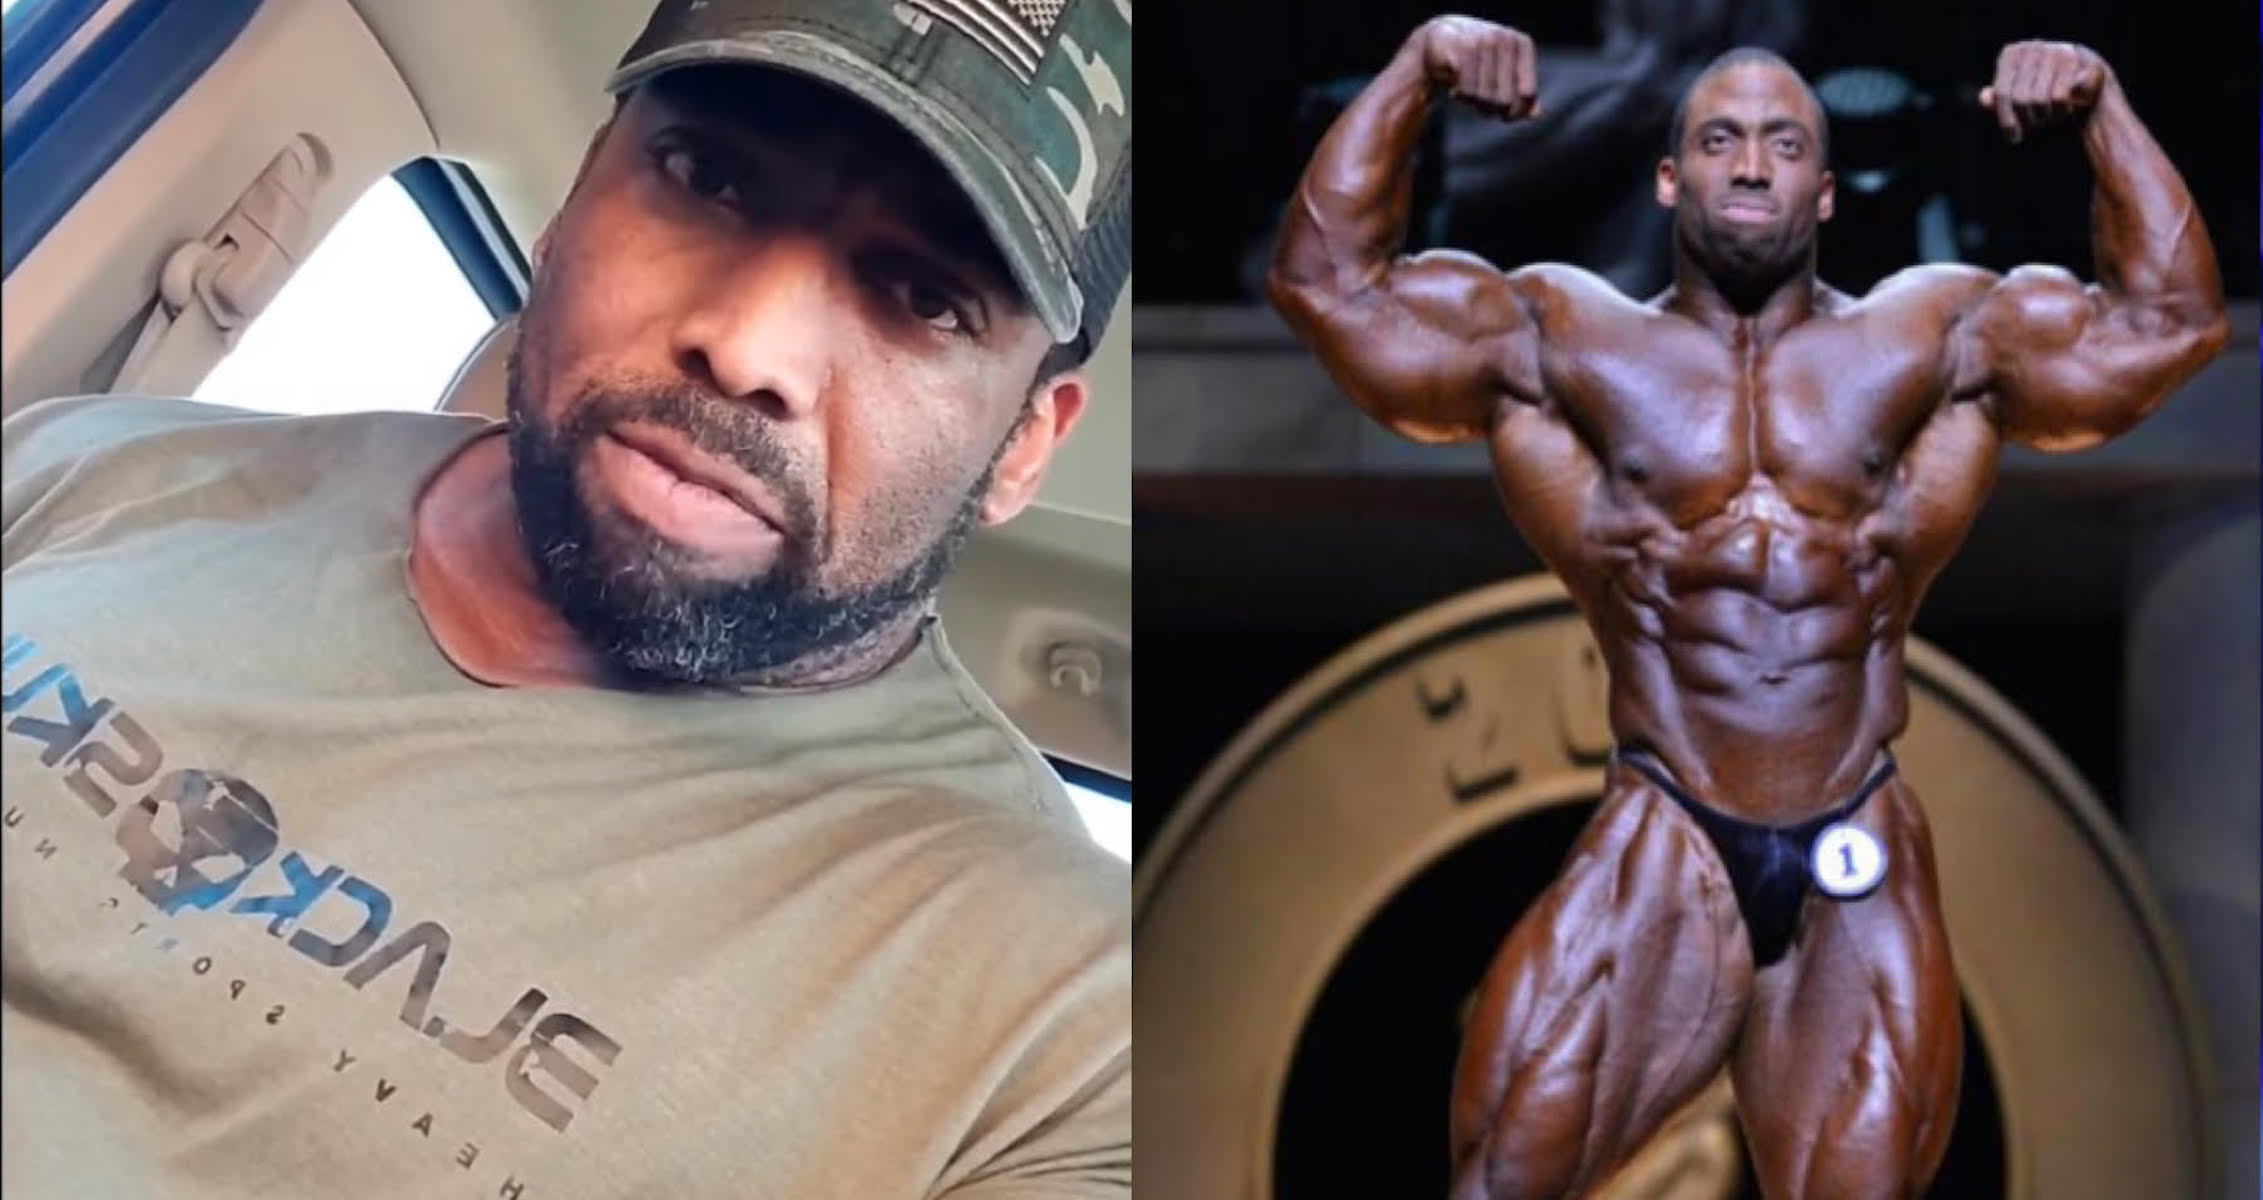 Cedric McMillan Details Stomach Issues Will Keep Him Out Of Arnold Classic